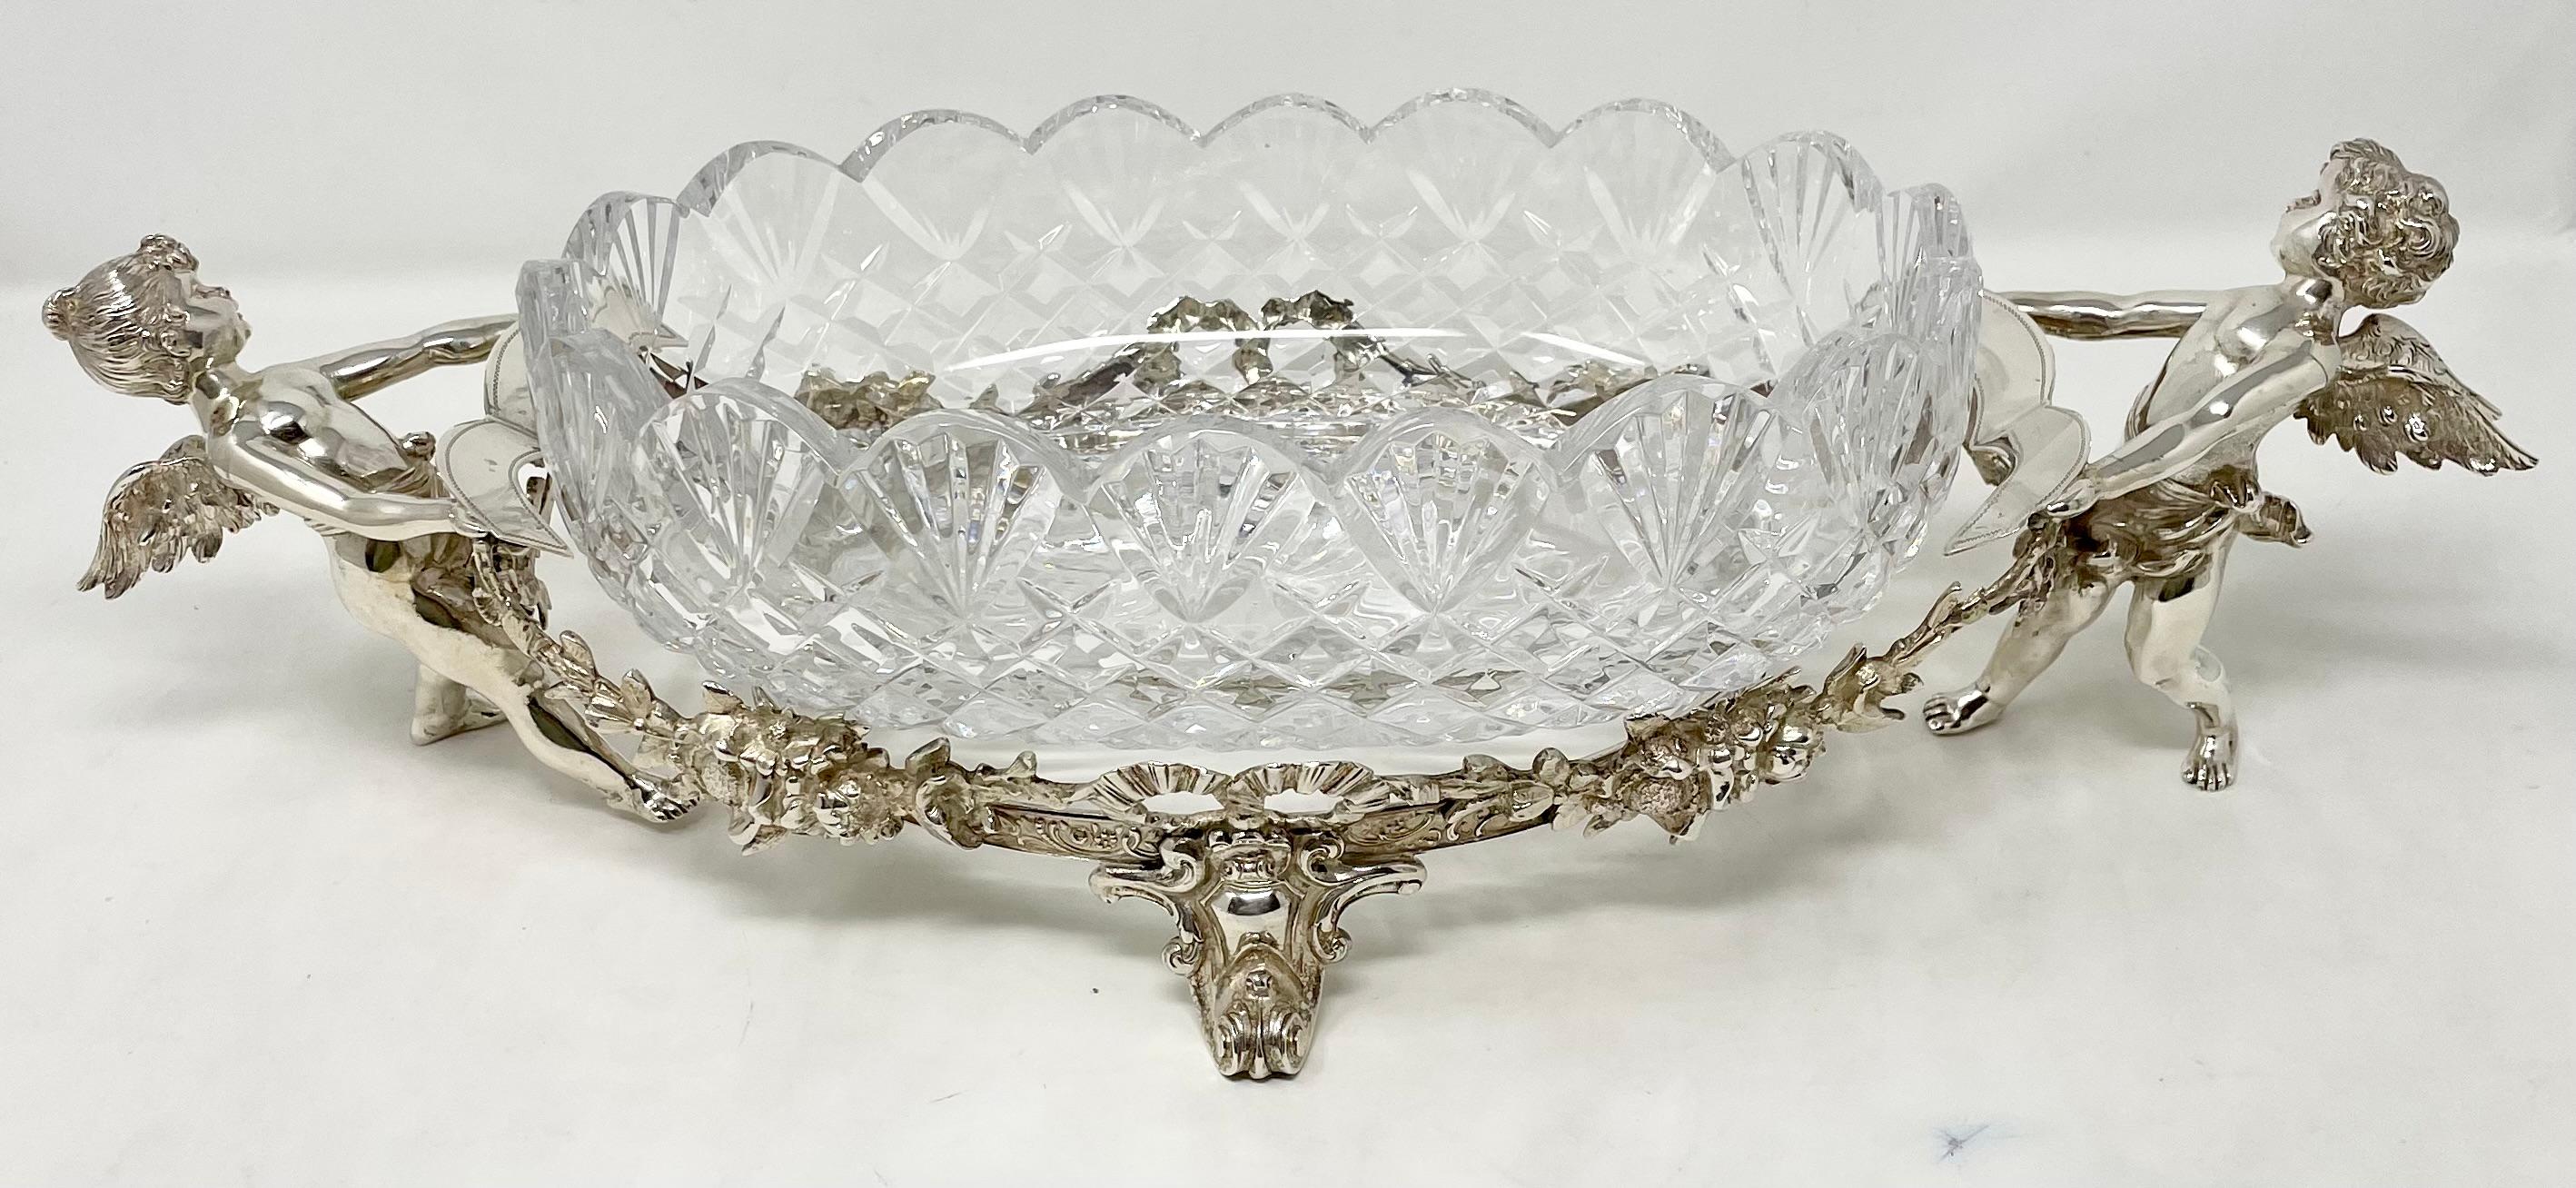 Antique French cut crystal & silver on bronze centerpiece with figural bows and cherubs, circa 1890.